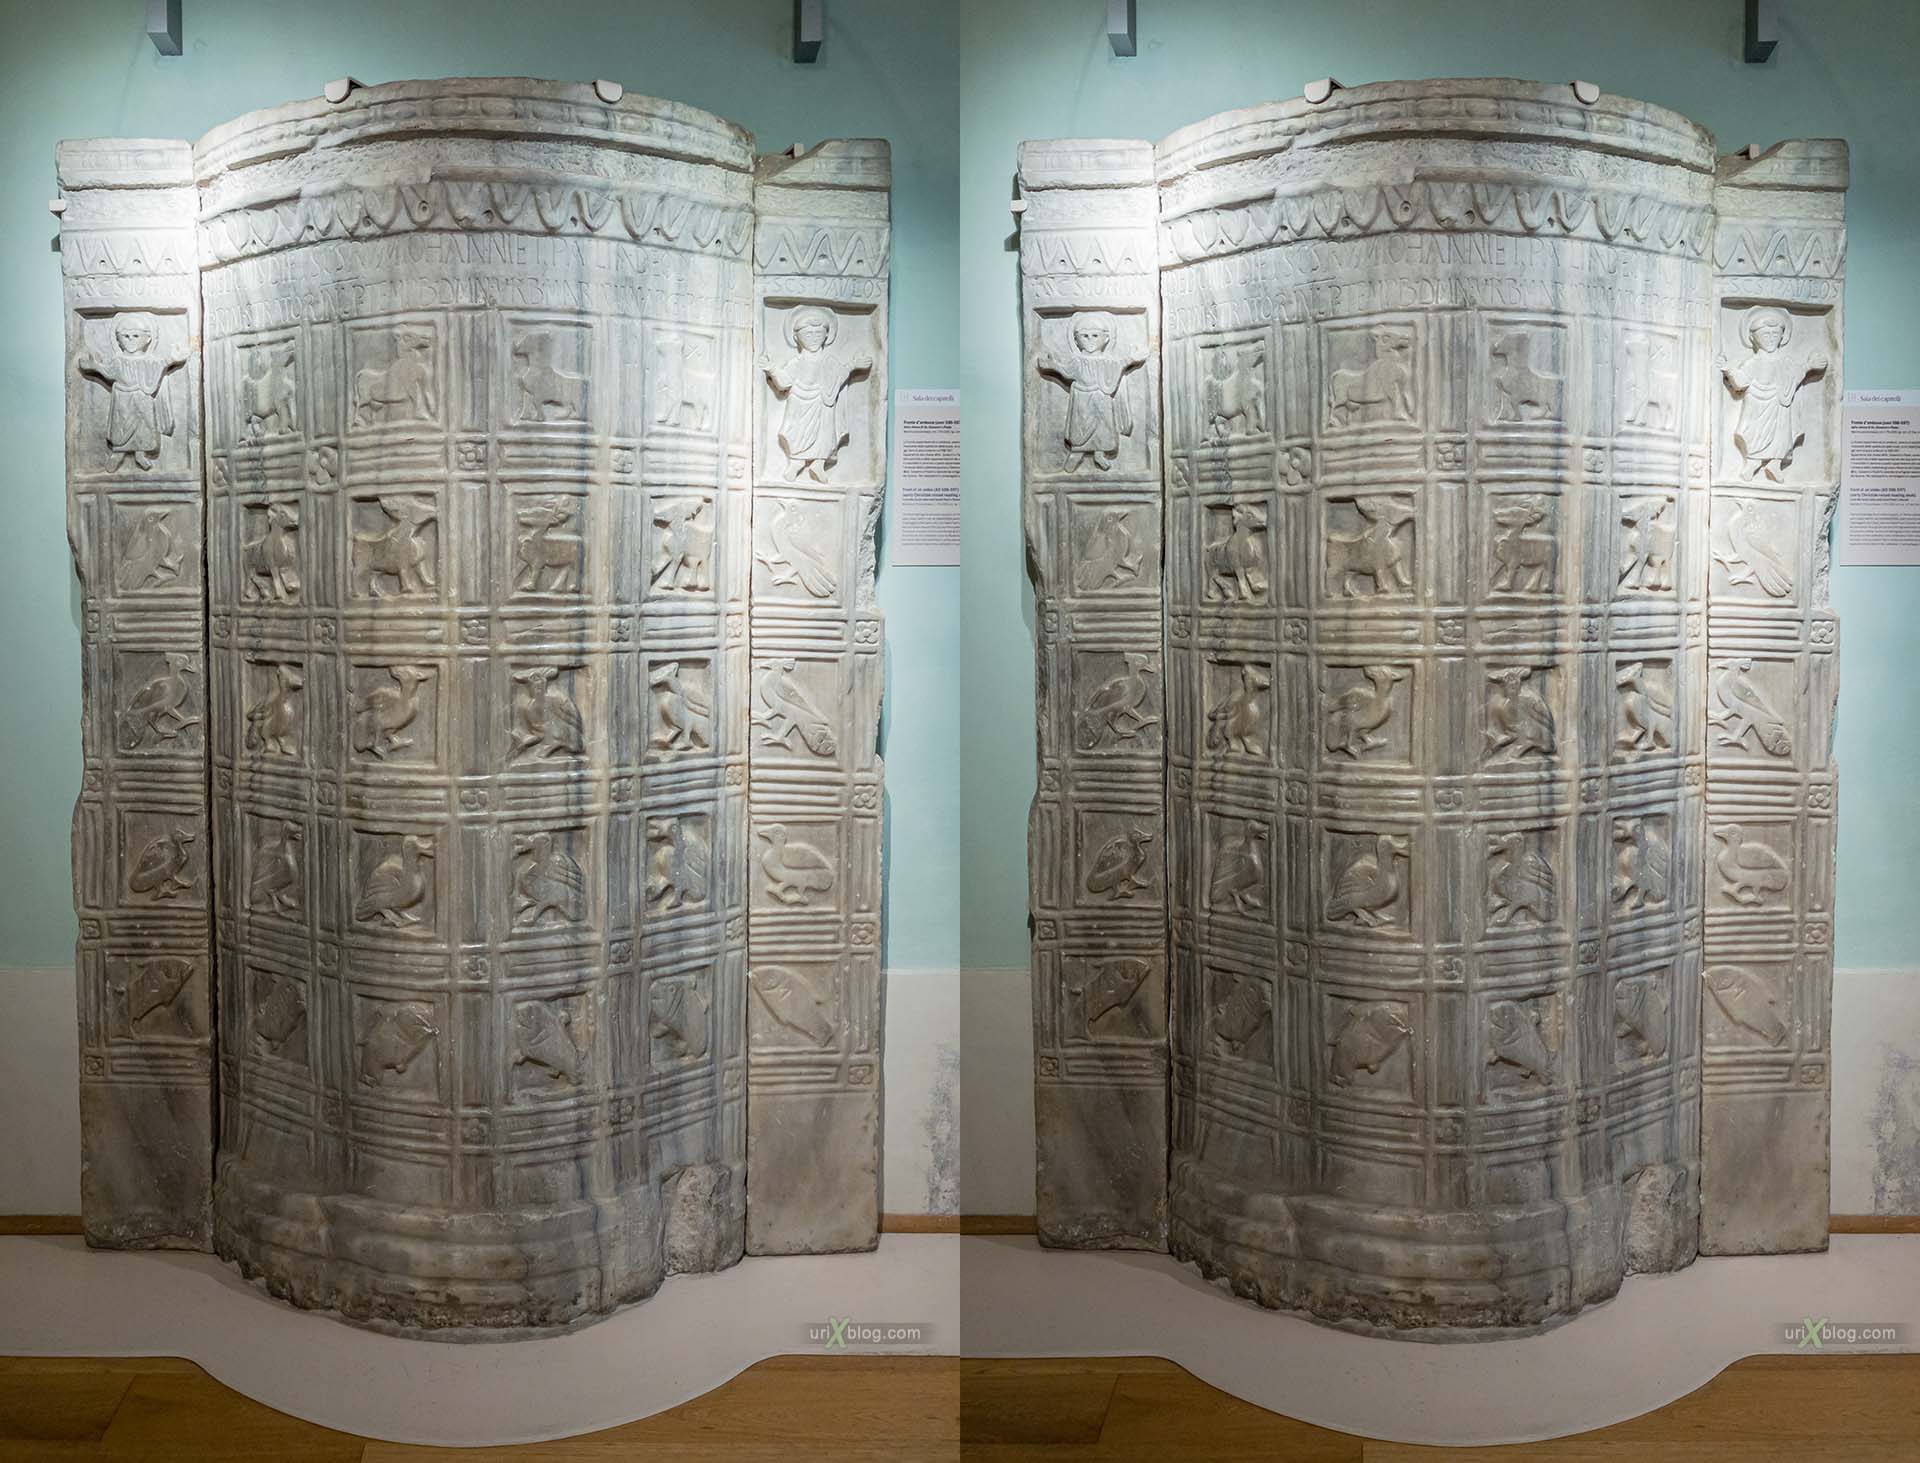 Archiepiscopal Museum, Ravenna, Italy, 3D, stereo pair, cross-eyed, crossview, cross view stereo pair, stereoscopic